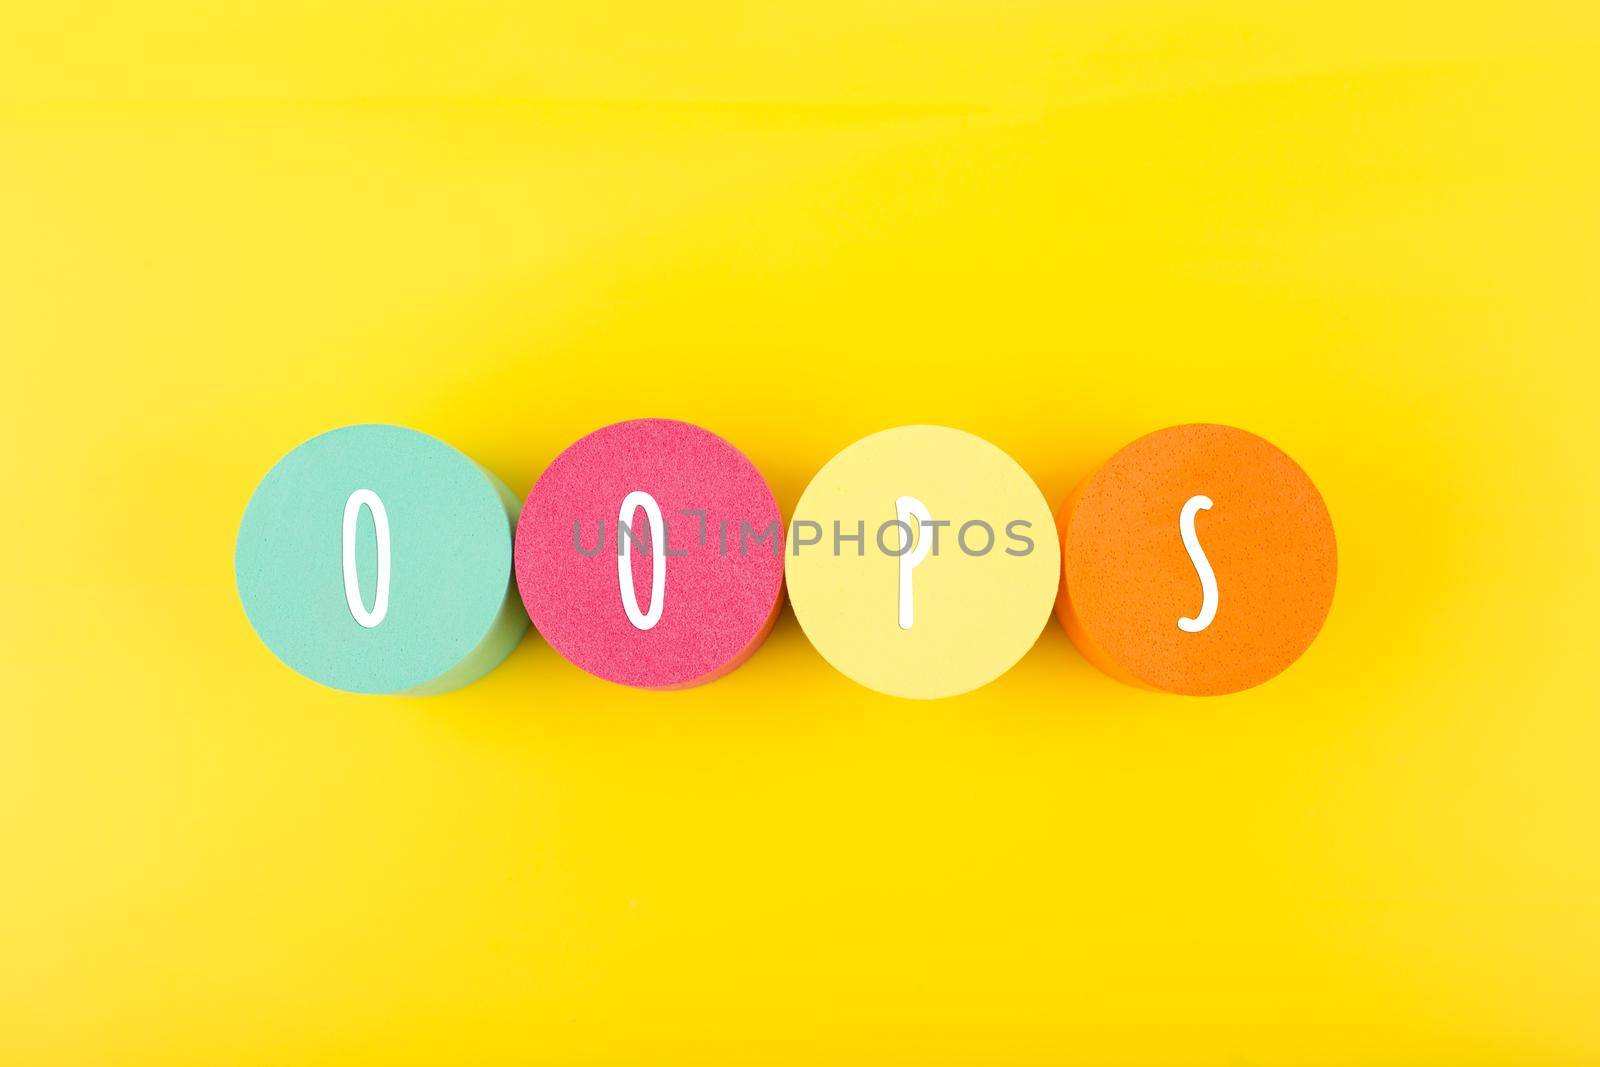 Word oops written on colorful round geometric against yellow background by Senorina_Irina